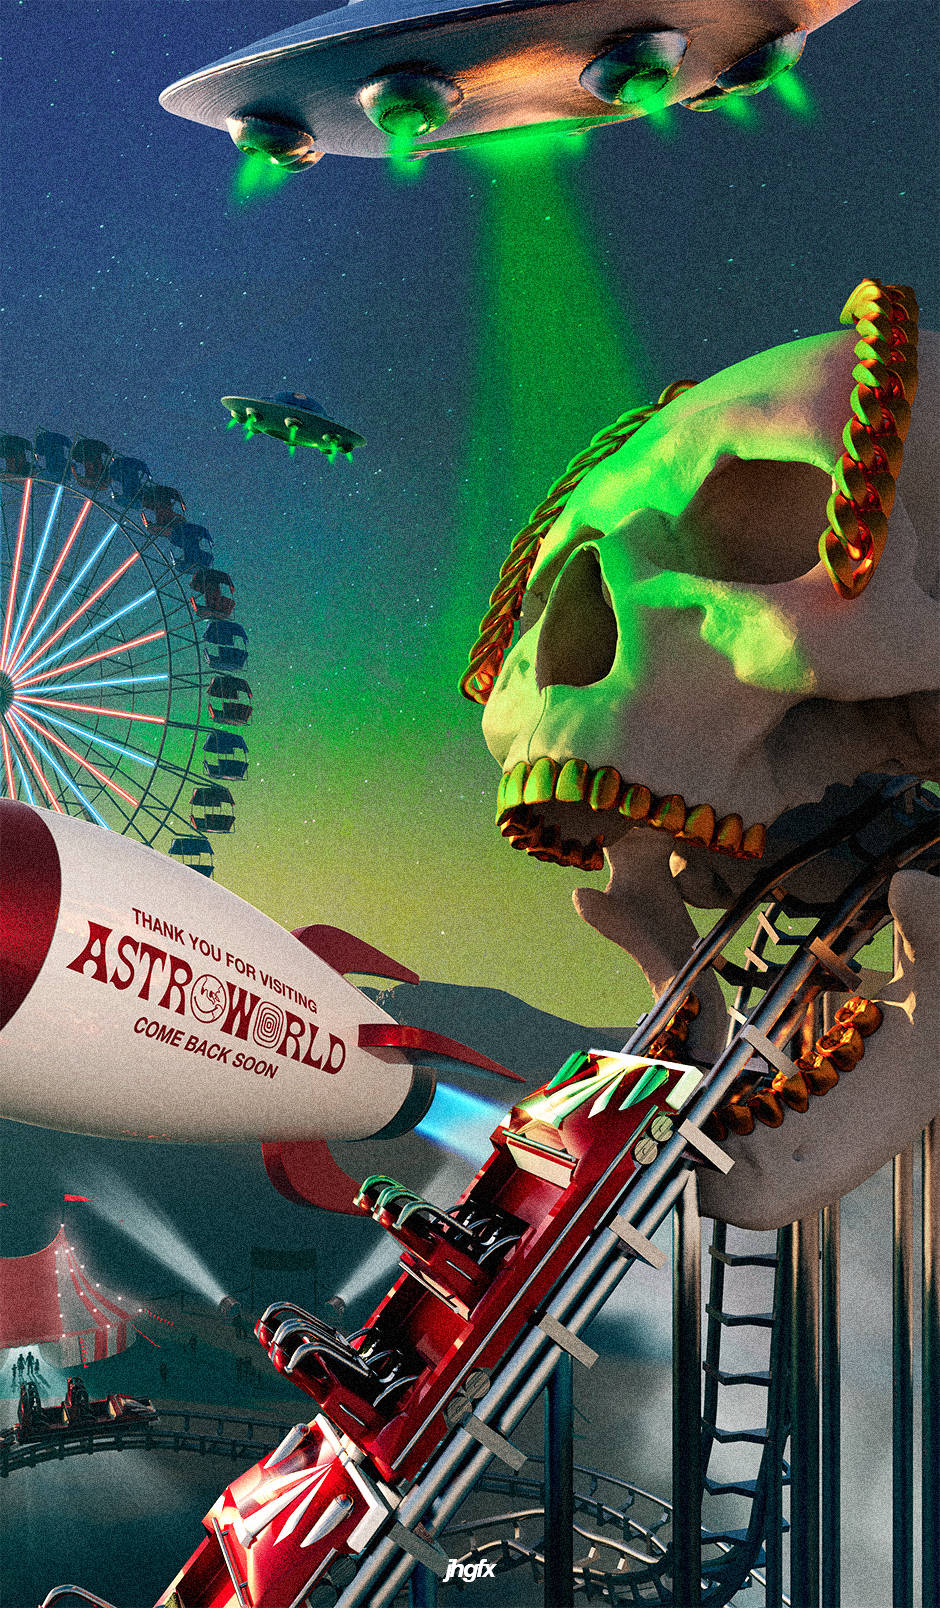 Feel the magic of Astroworld Wallpaper